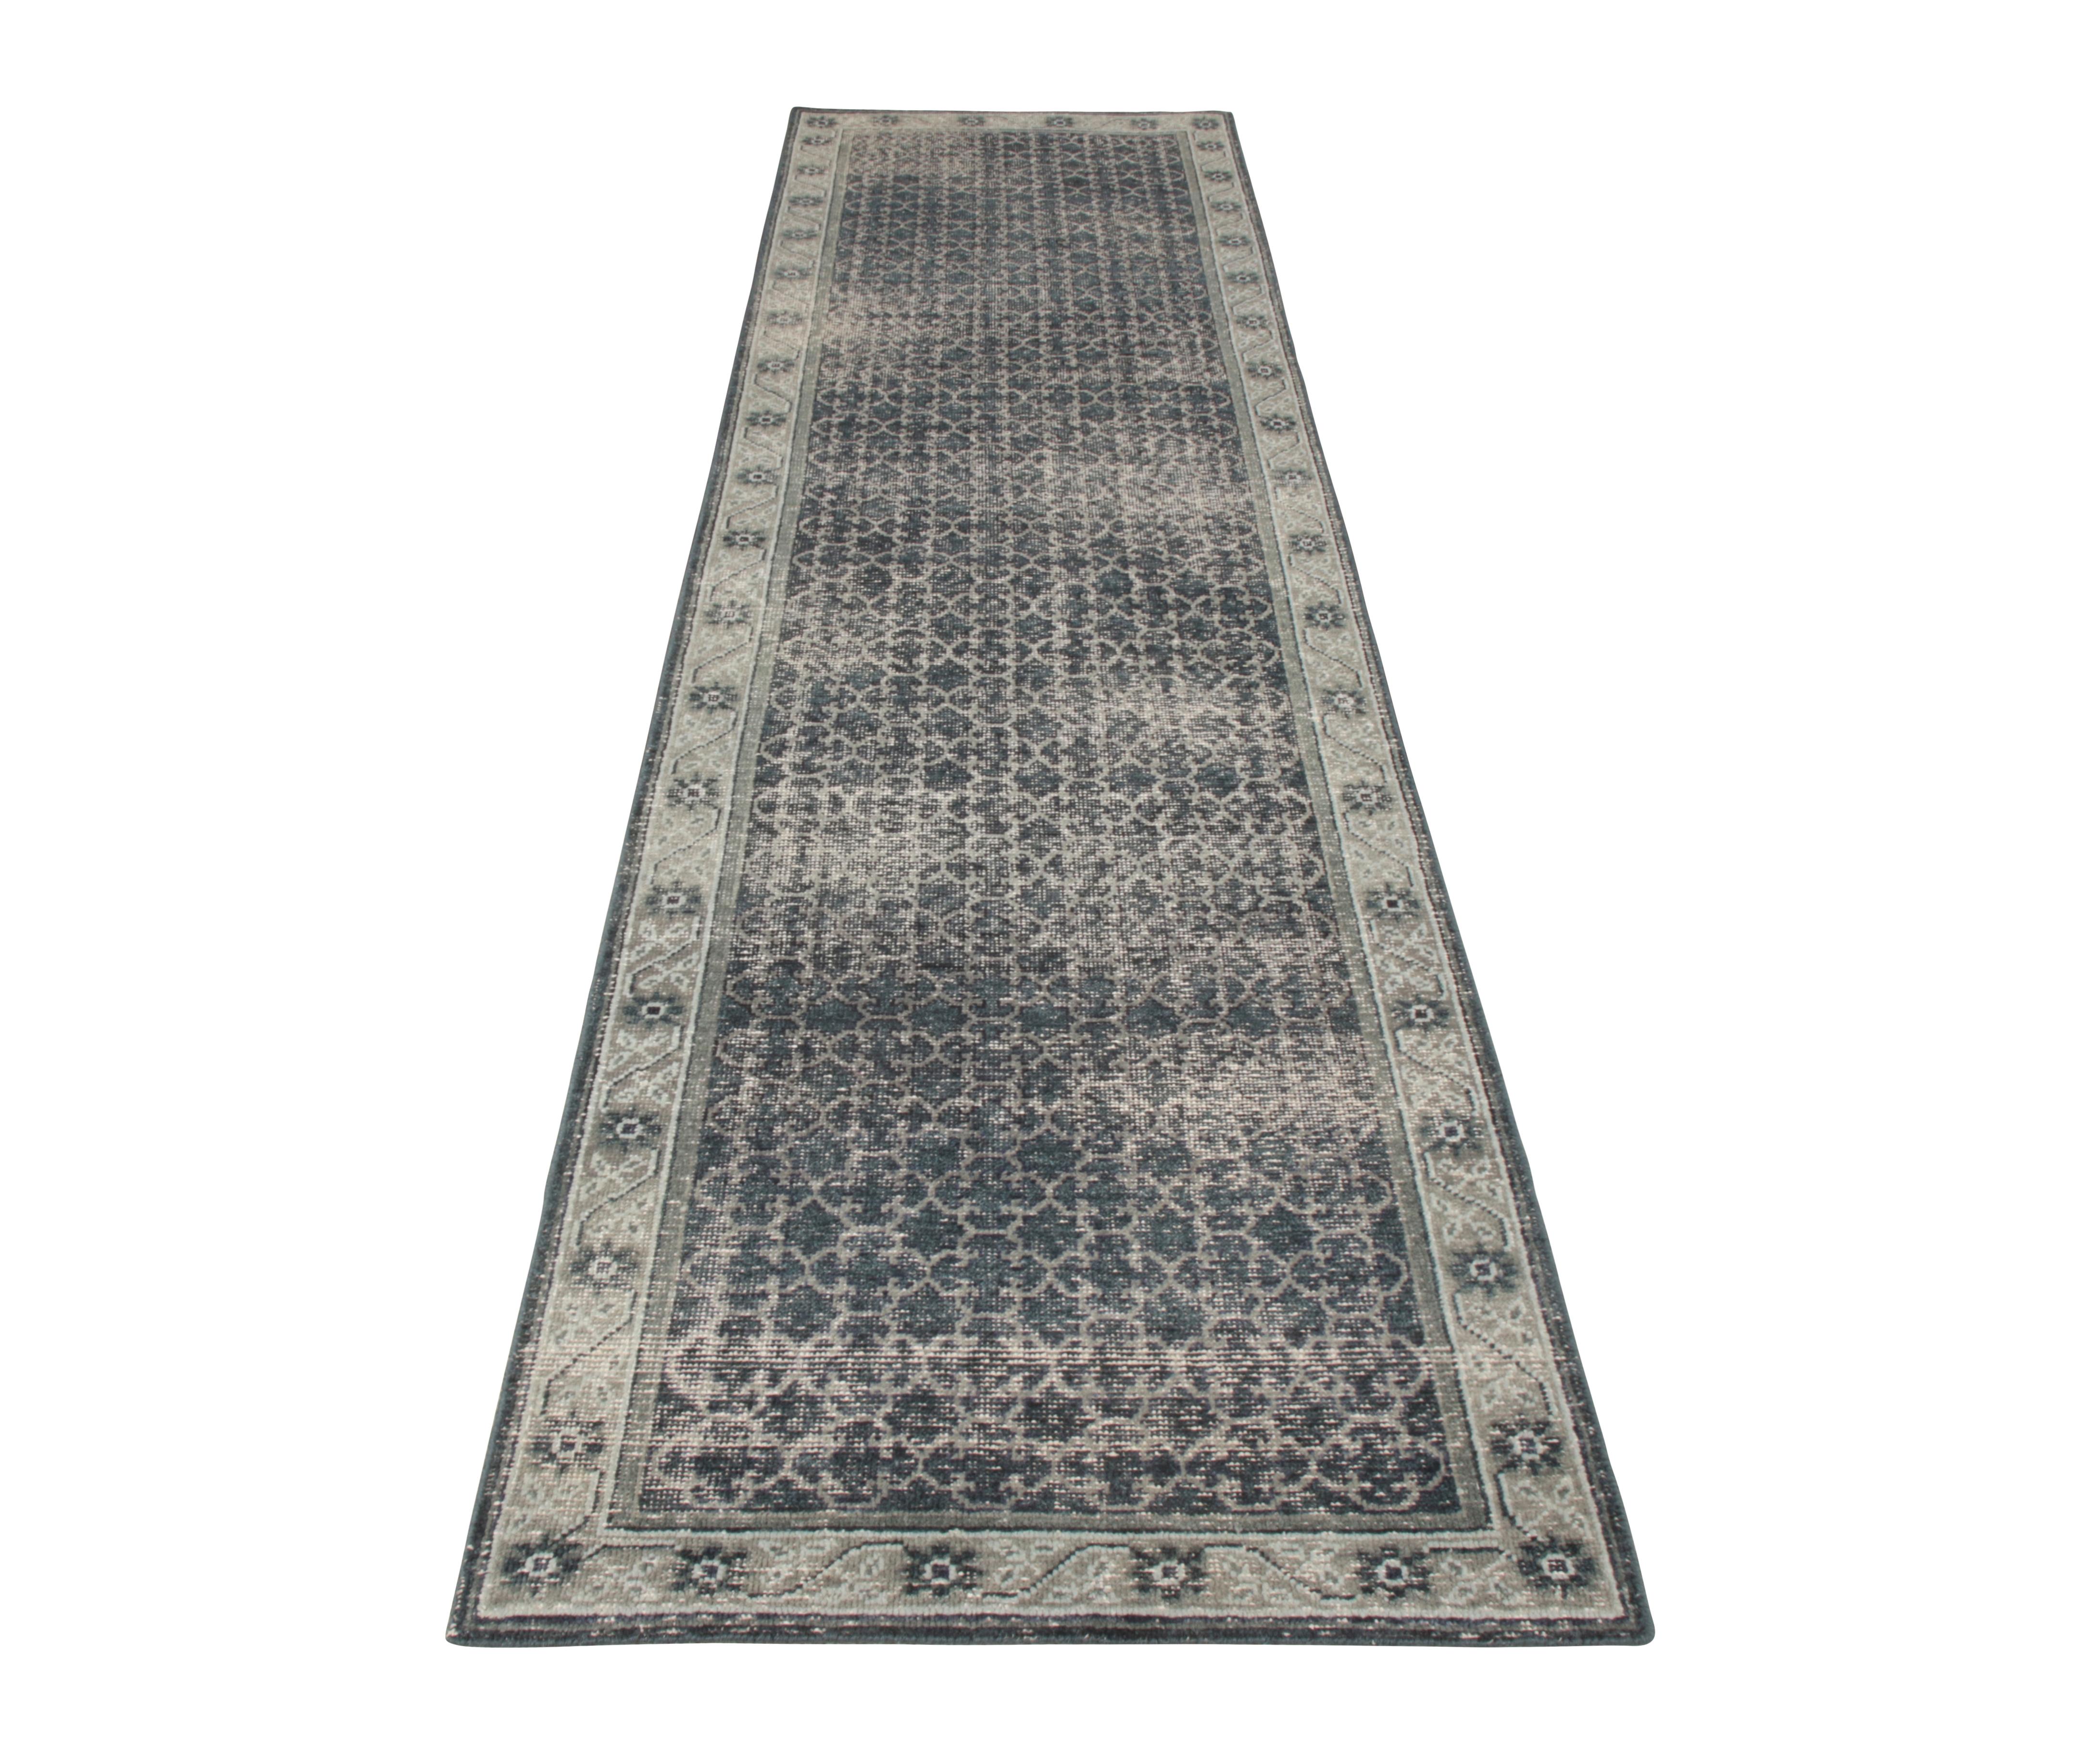 An ostentatious custom runner design from Rug & Kilim’s Homage Collection. This 3 x 12 edition of the runner boasts a calming personality in a soothing blue colorway that elegantly complements its intricate geometric pattern with subtle gray